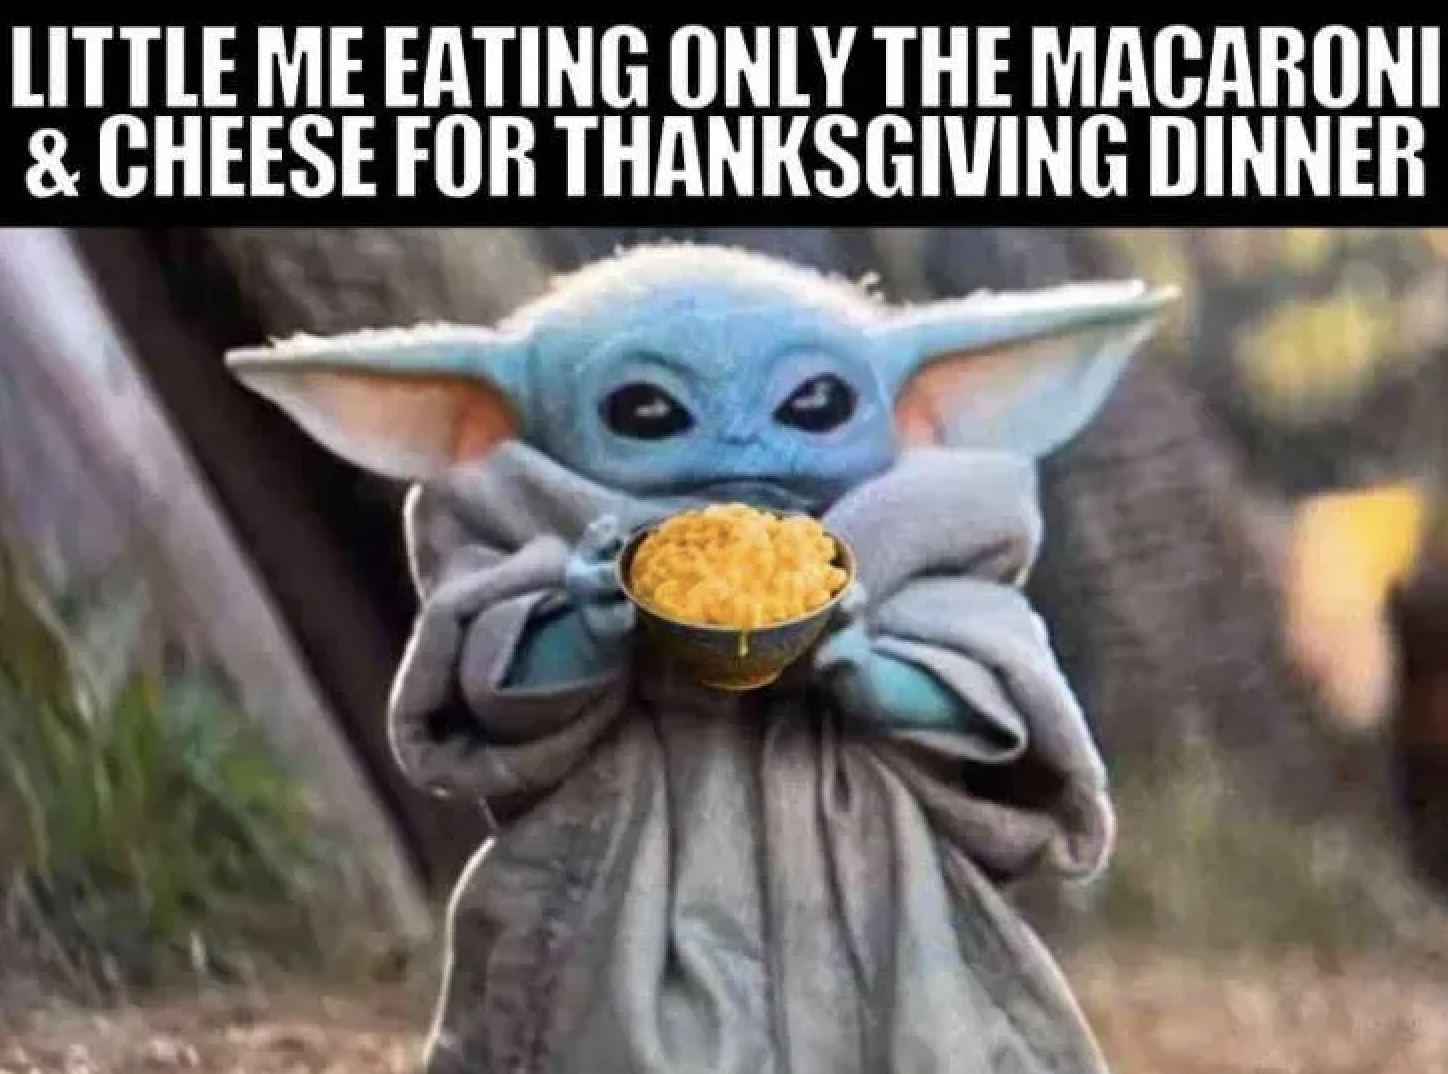 photo caption - Little Me Eating Only The Macaroni & Cheese For Thanksgiving Dinner